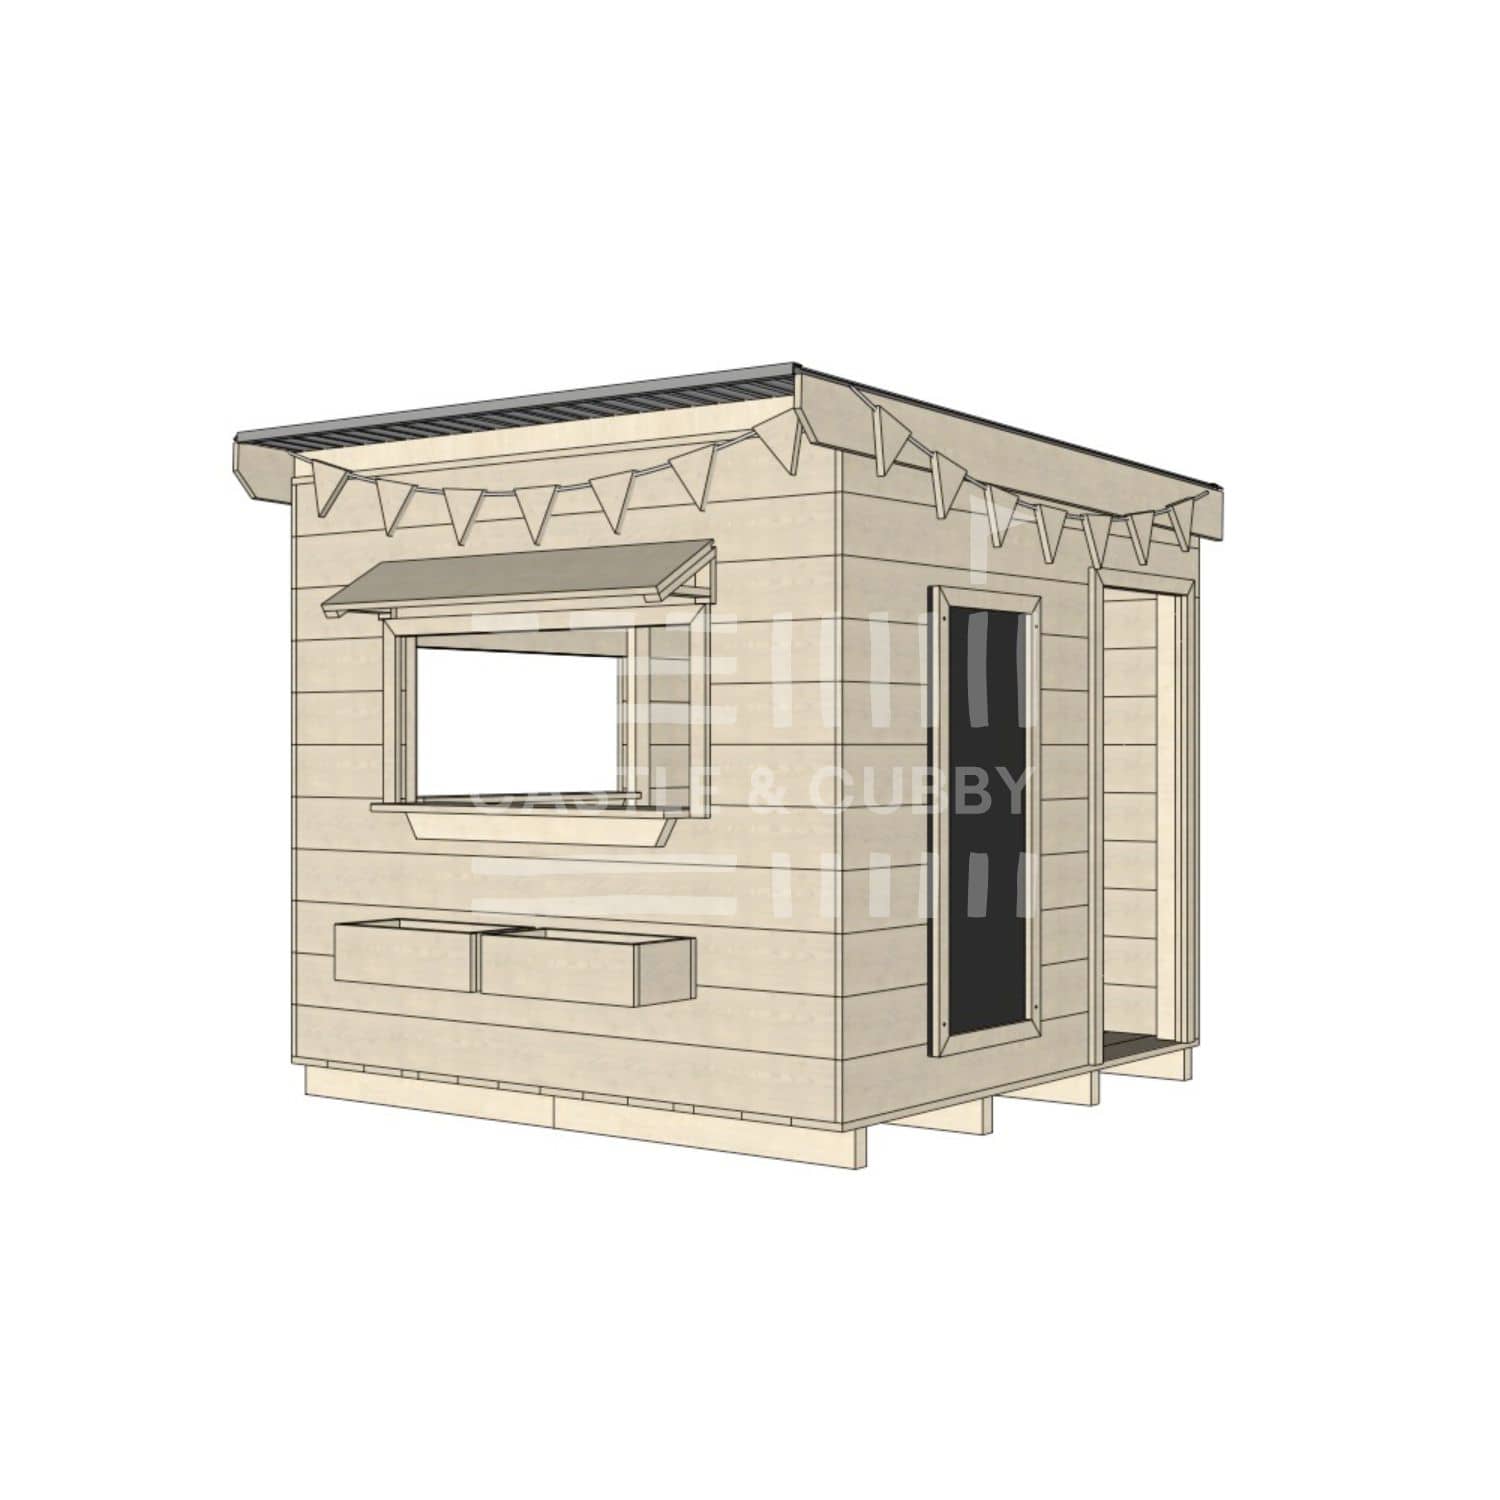 Flat roof raw wooden cubby house commercial education midi square